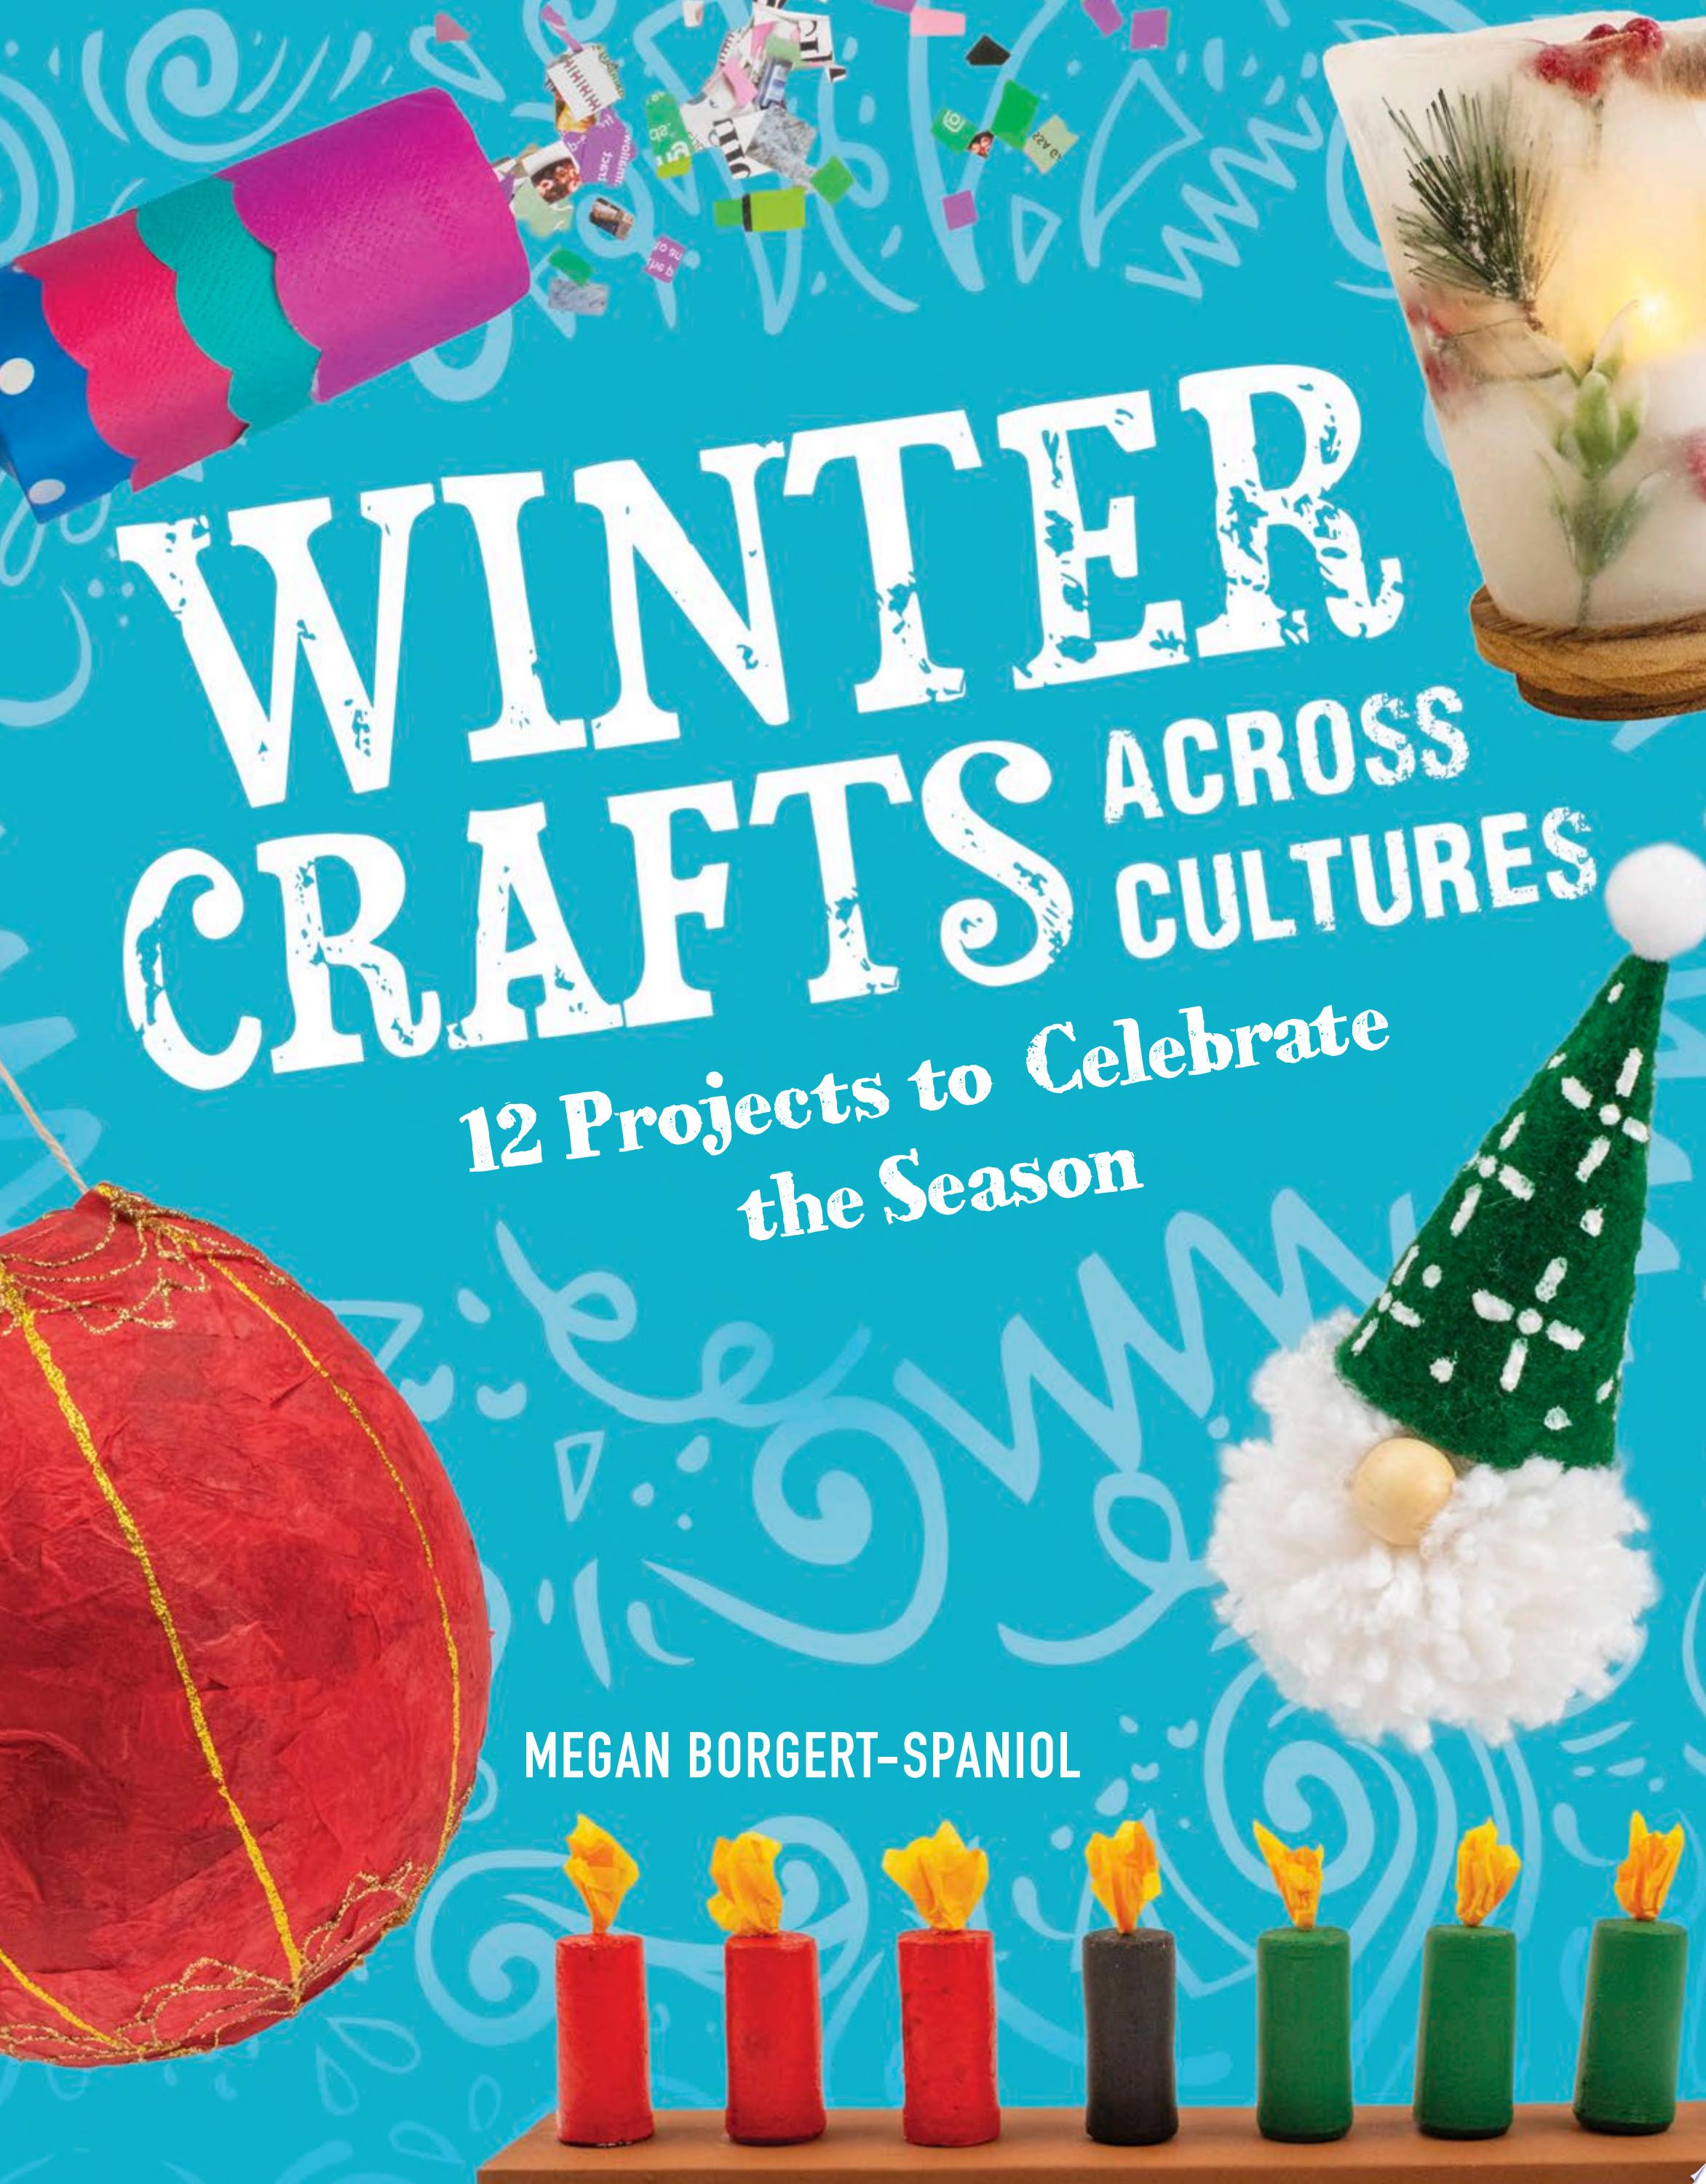 Image for "Winter Crafts Across Cultures"